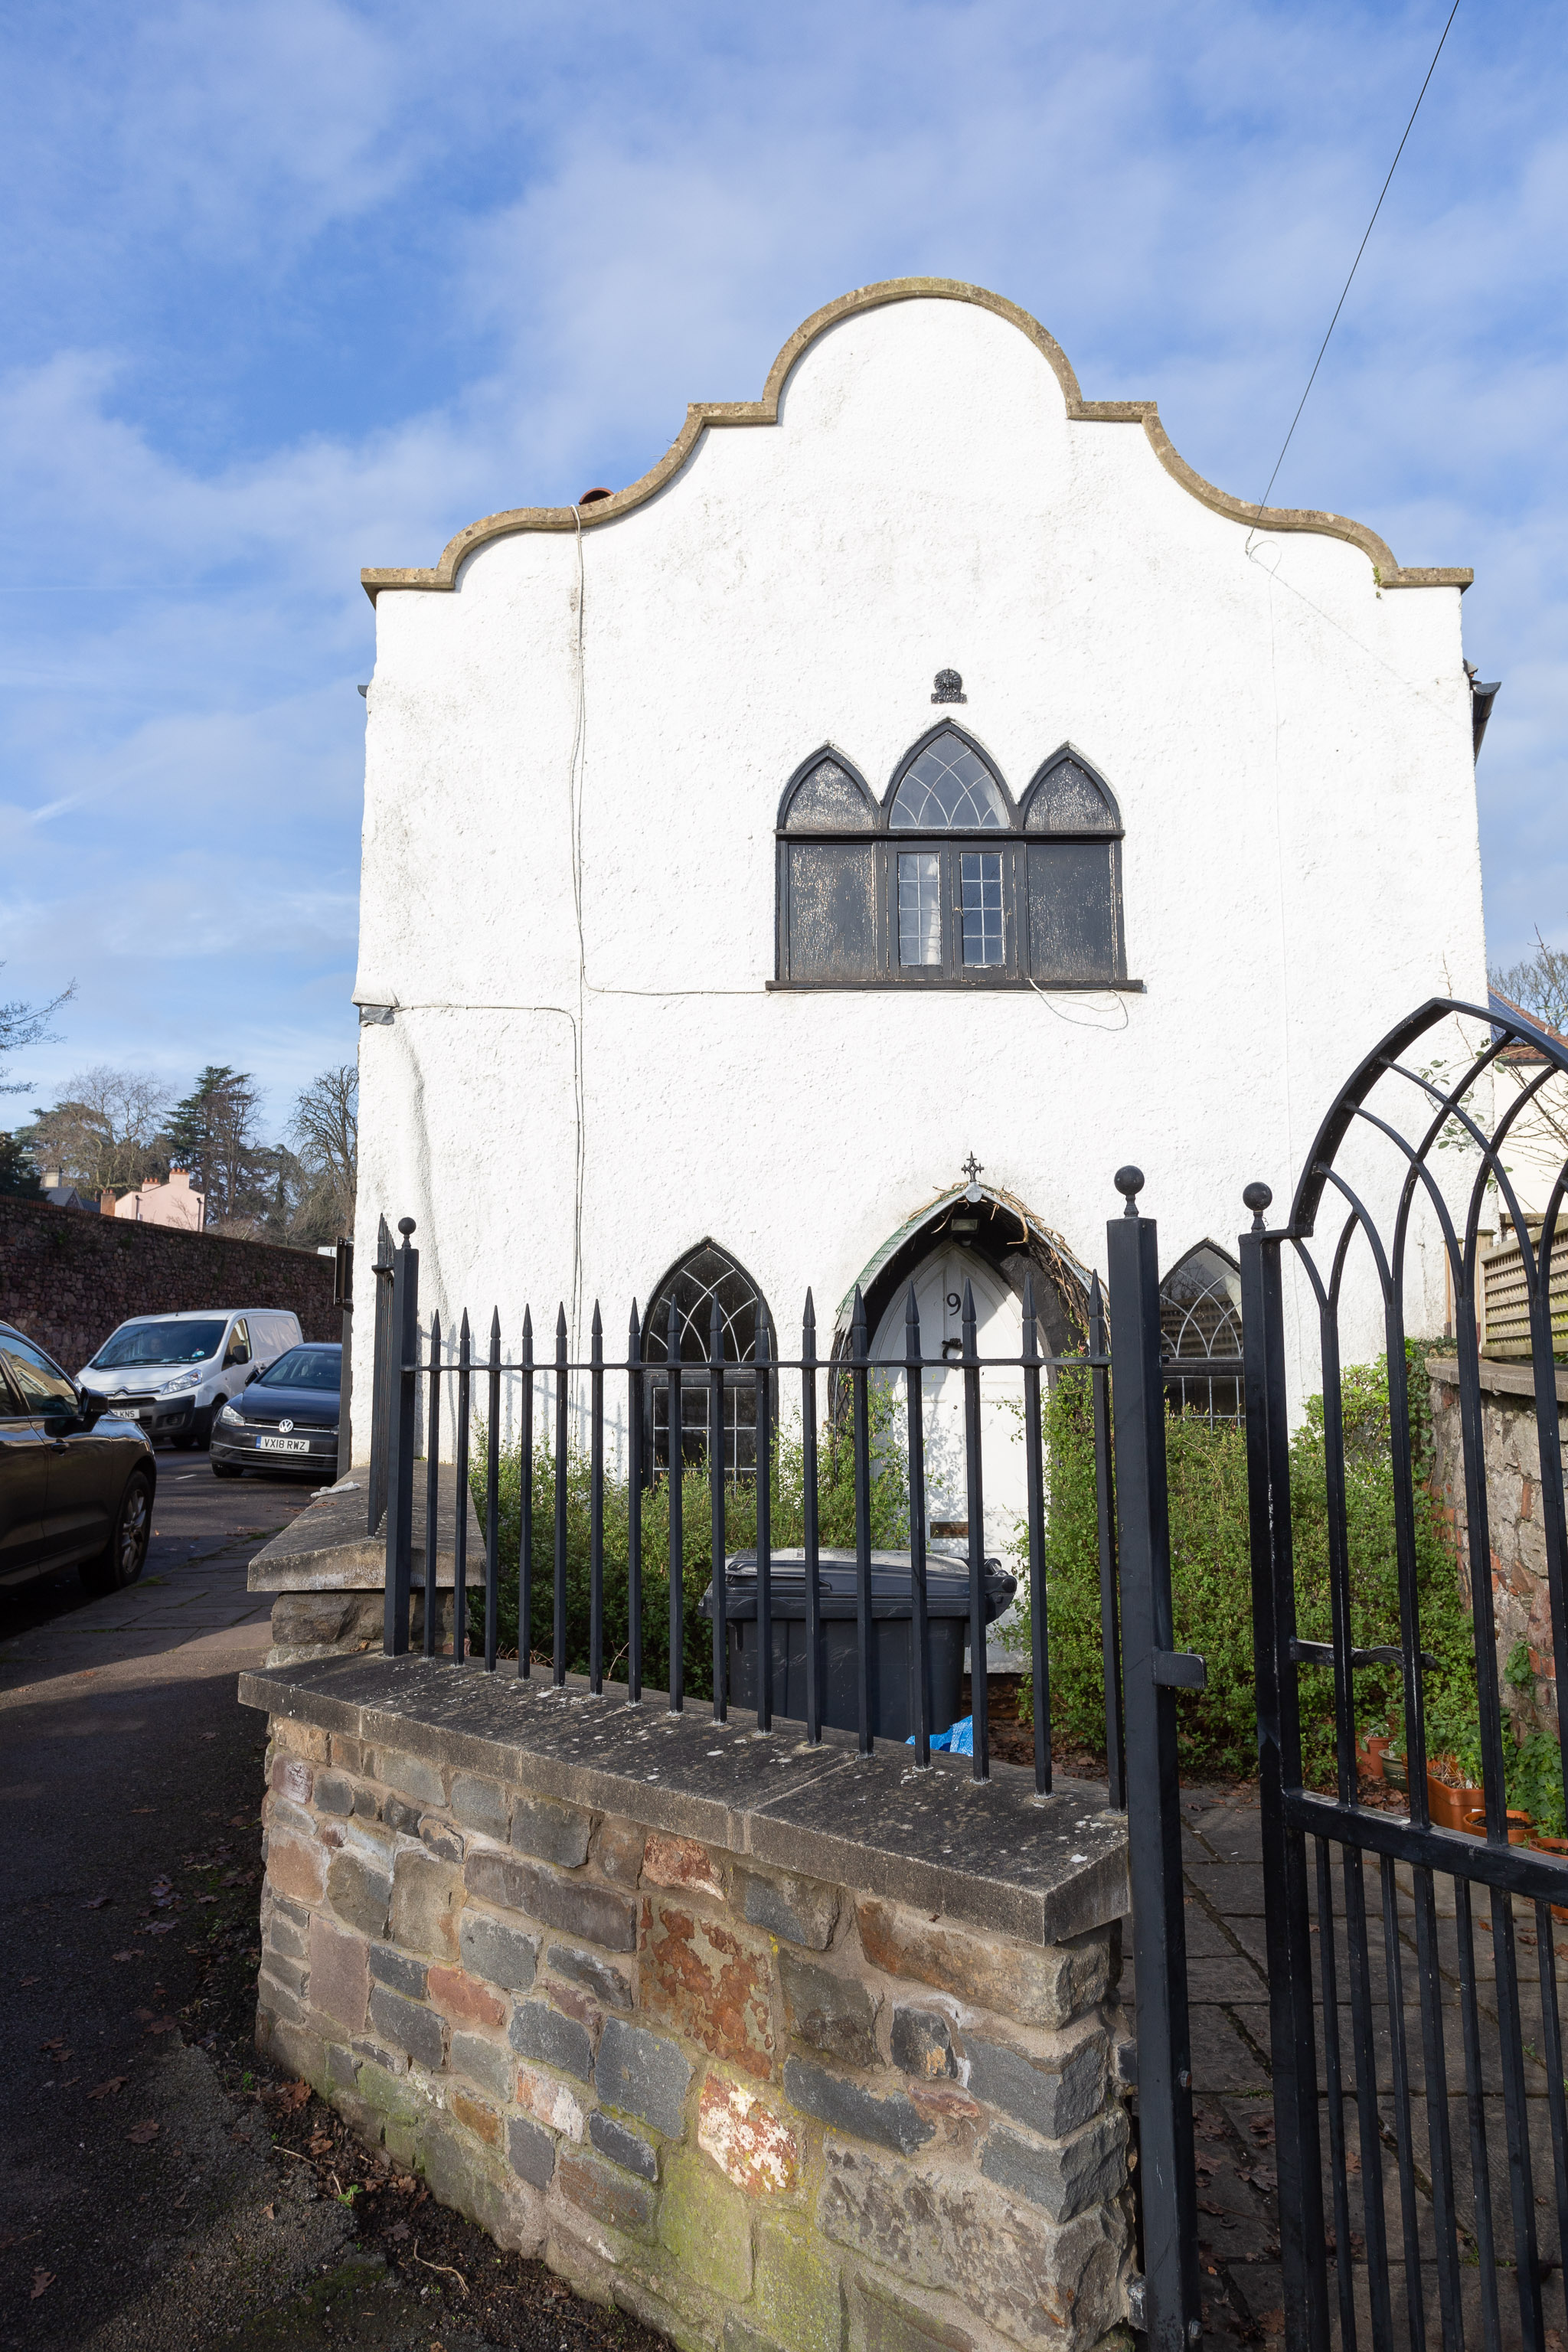 Gothic Arches
Mid-to-late 18th century, in the "gothick" style according to the listing. I approve of their spelling.  This is definitely the right listing, as h...